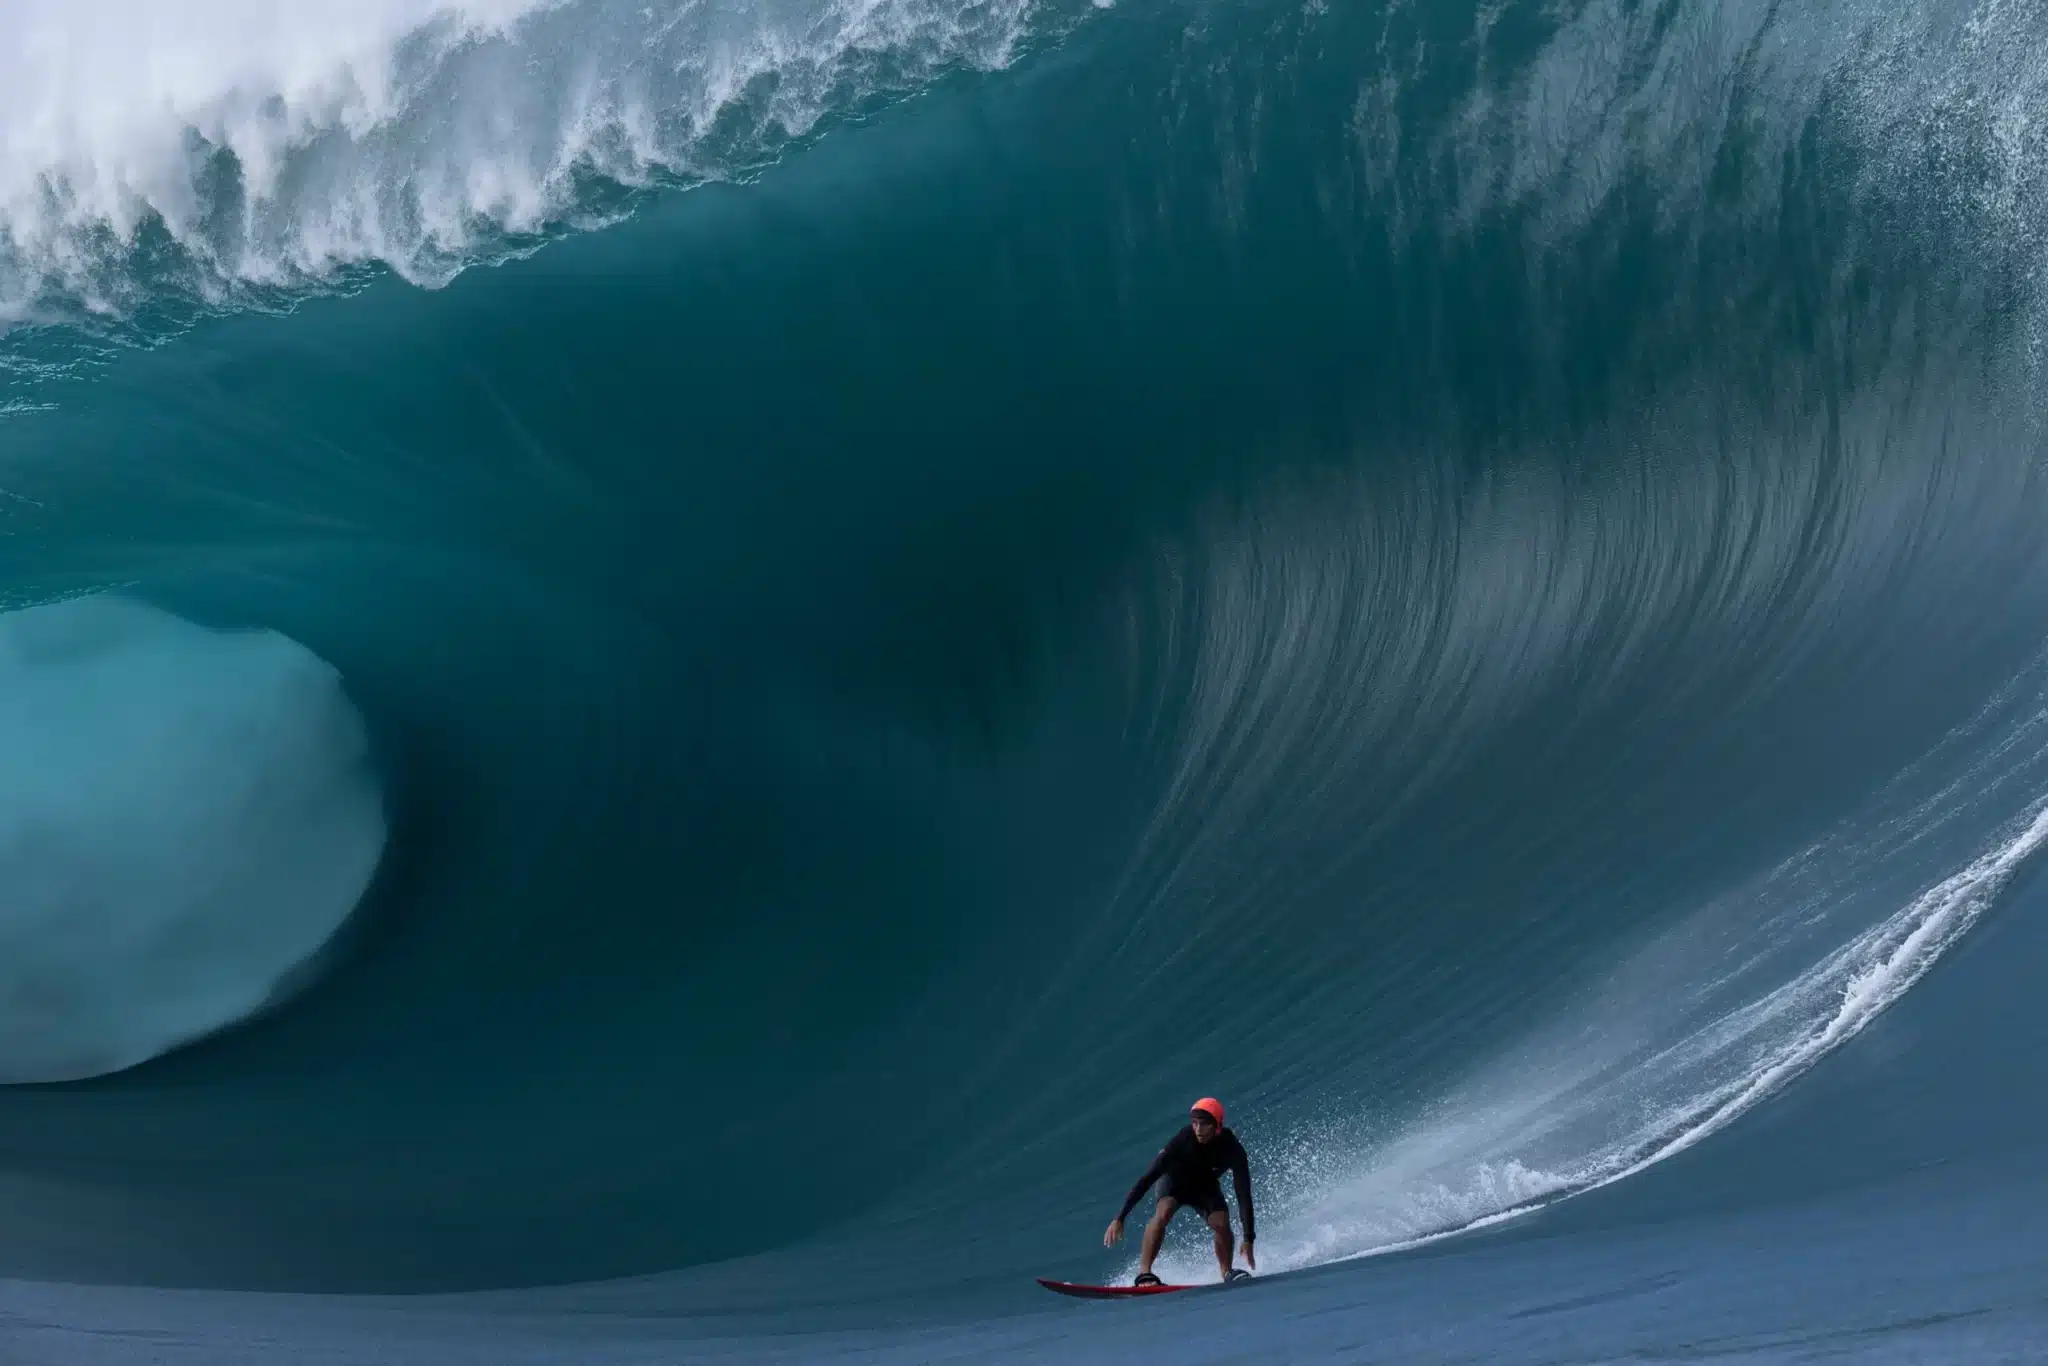 The JOB Surf Experience Guide to The Most Dangerous Waves on the